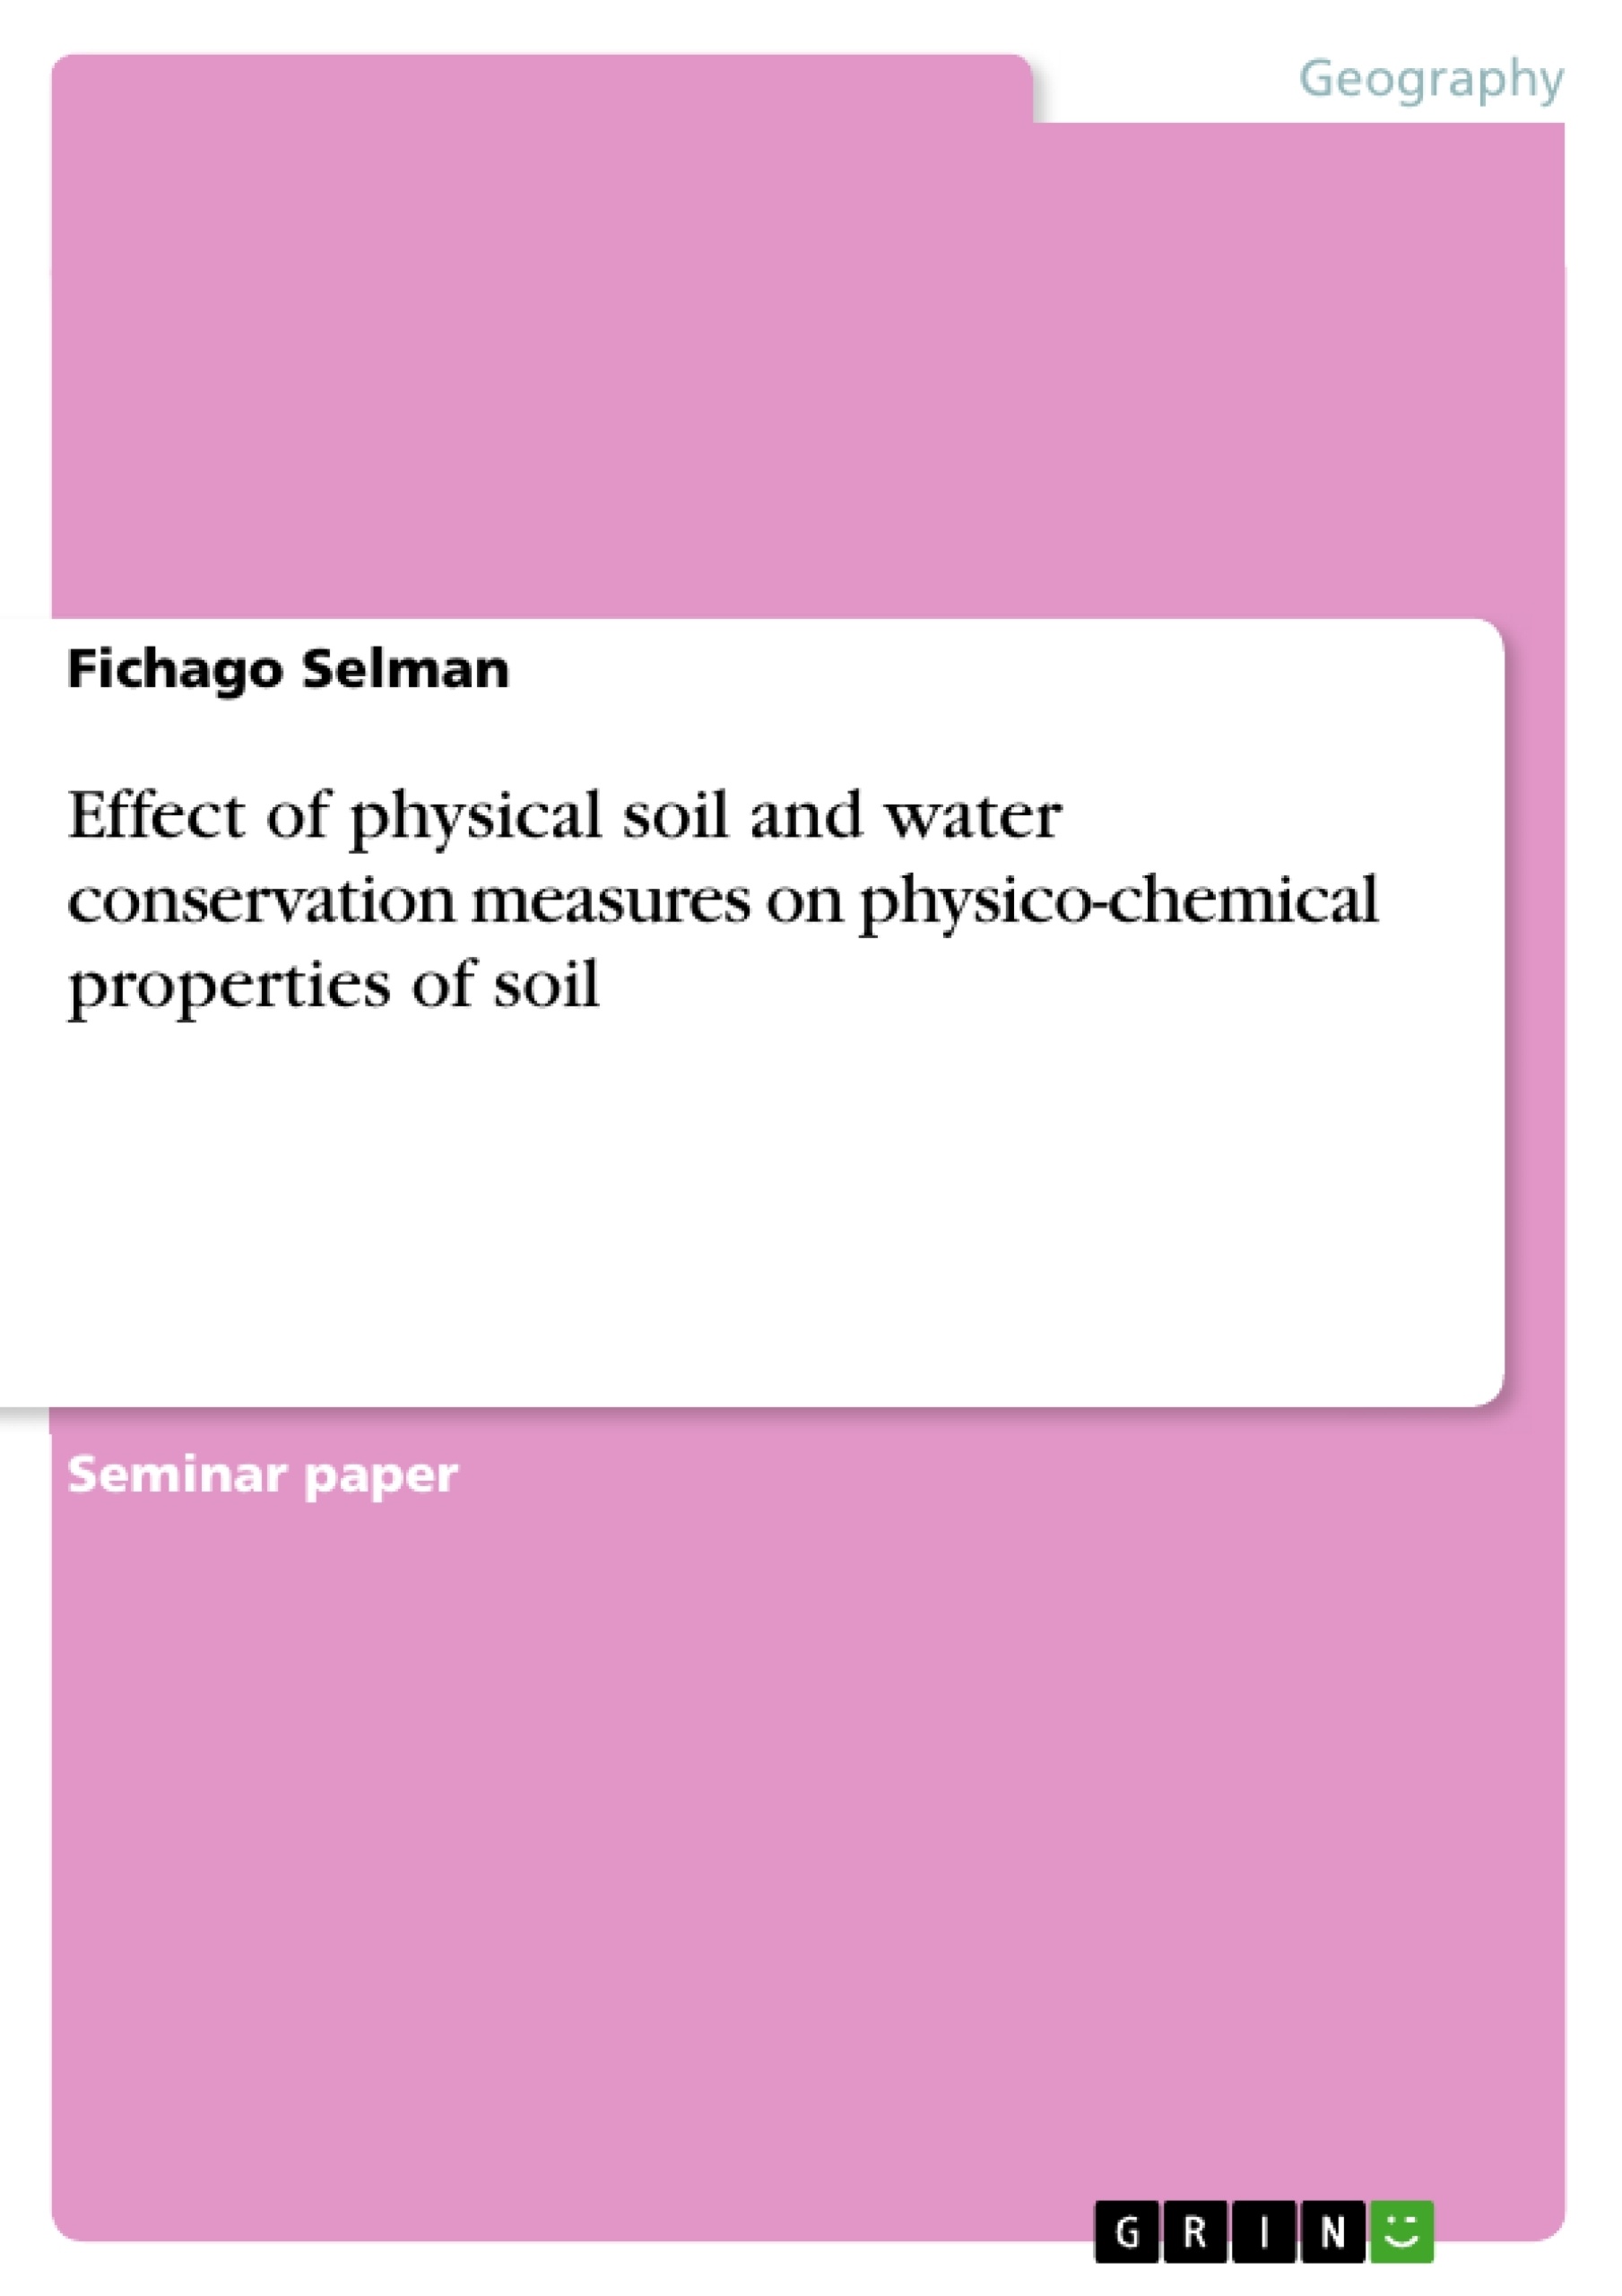 Title: Effect of physical soil and water conservation measures on physico-chemical properties of soil